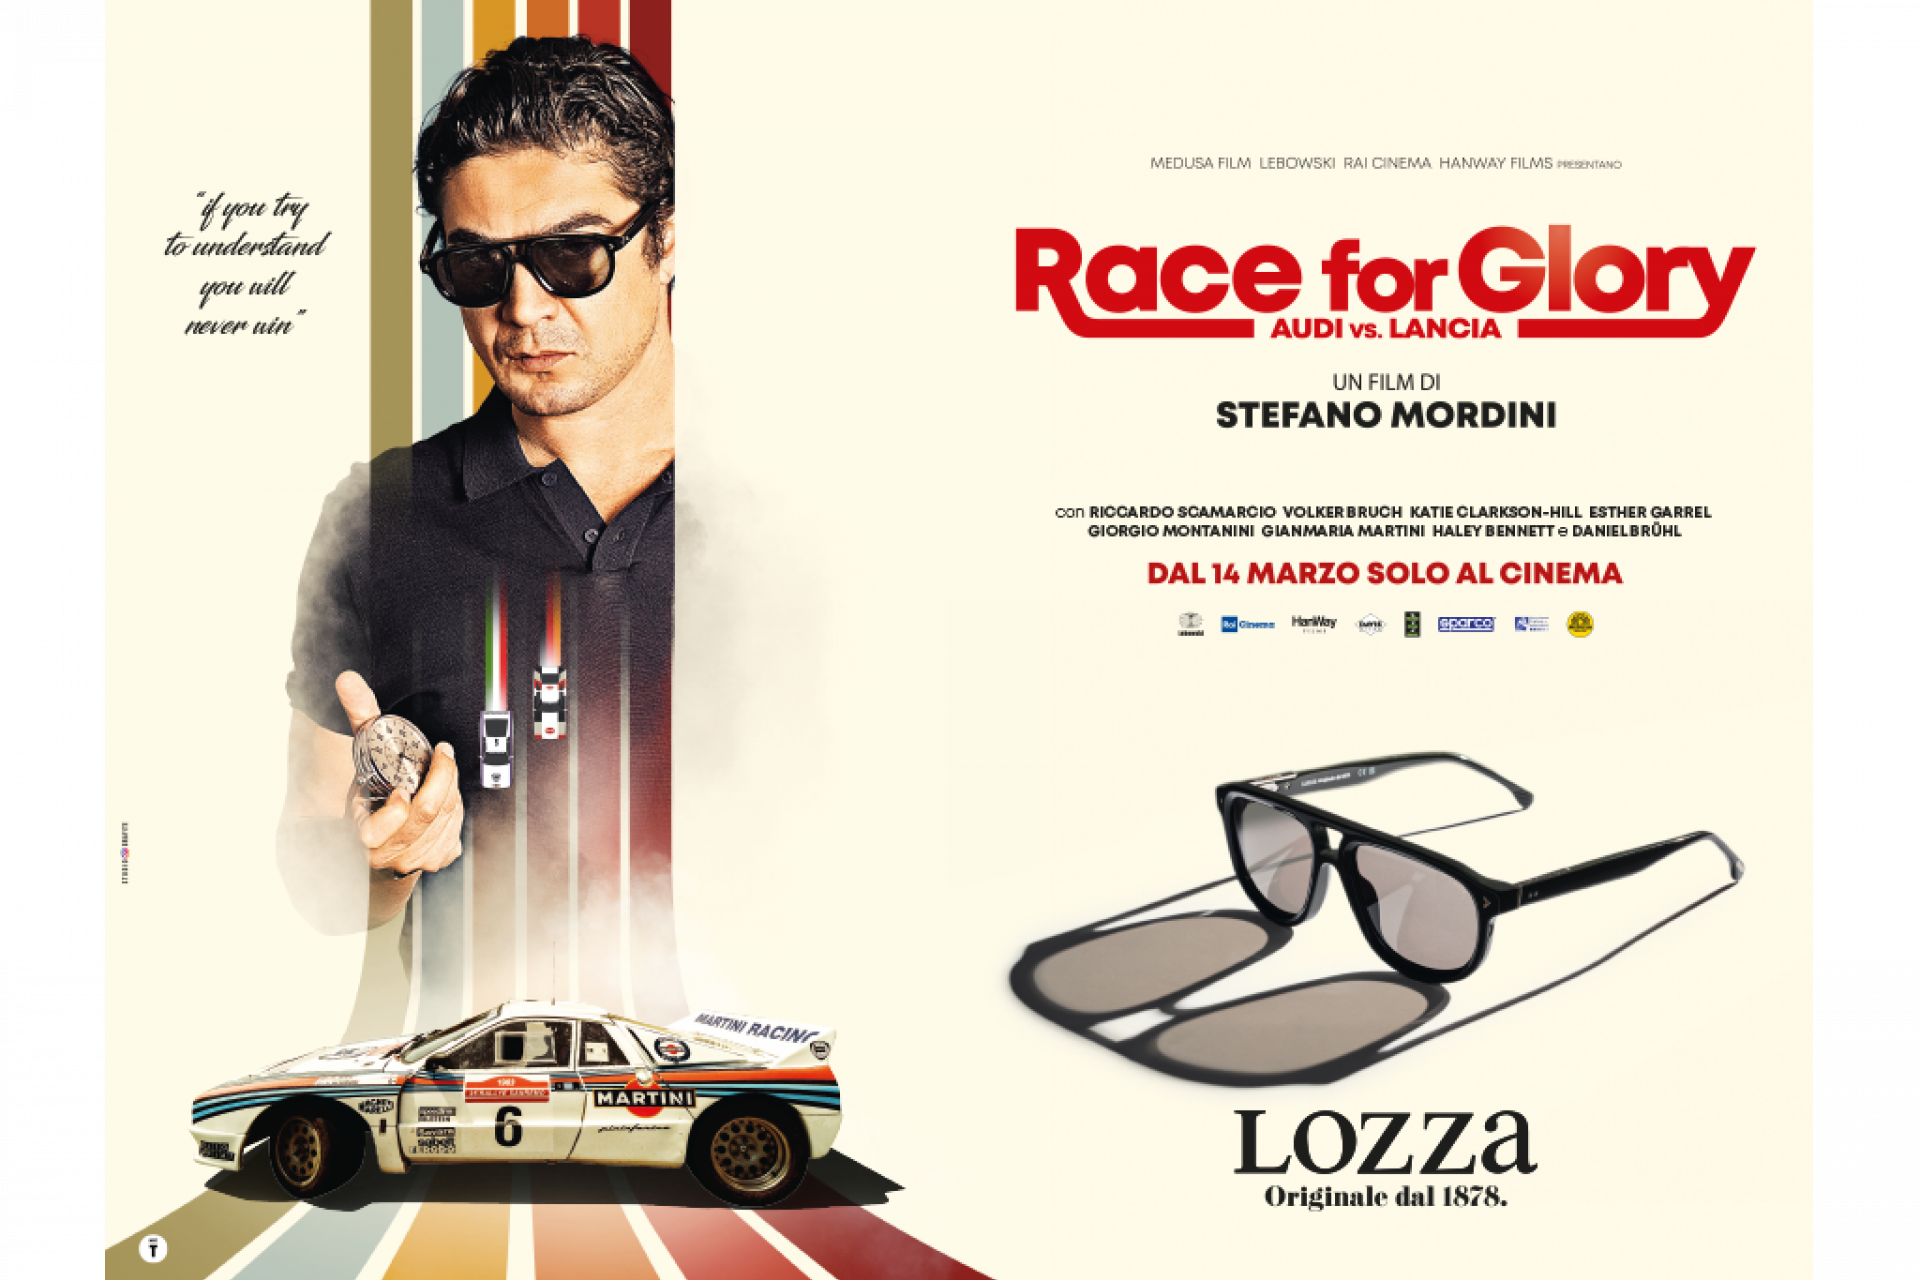 Race_for_Glory_LOZZA_film_1024.png